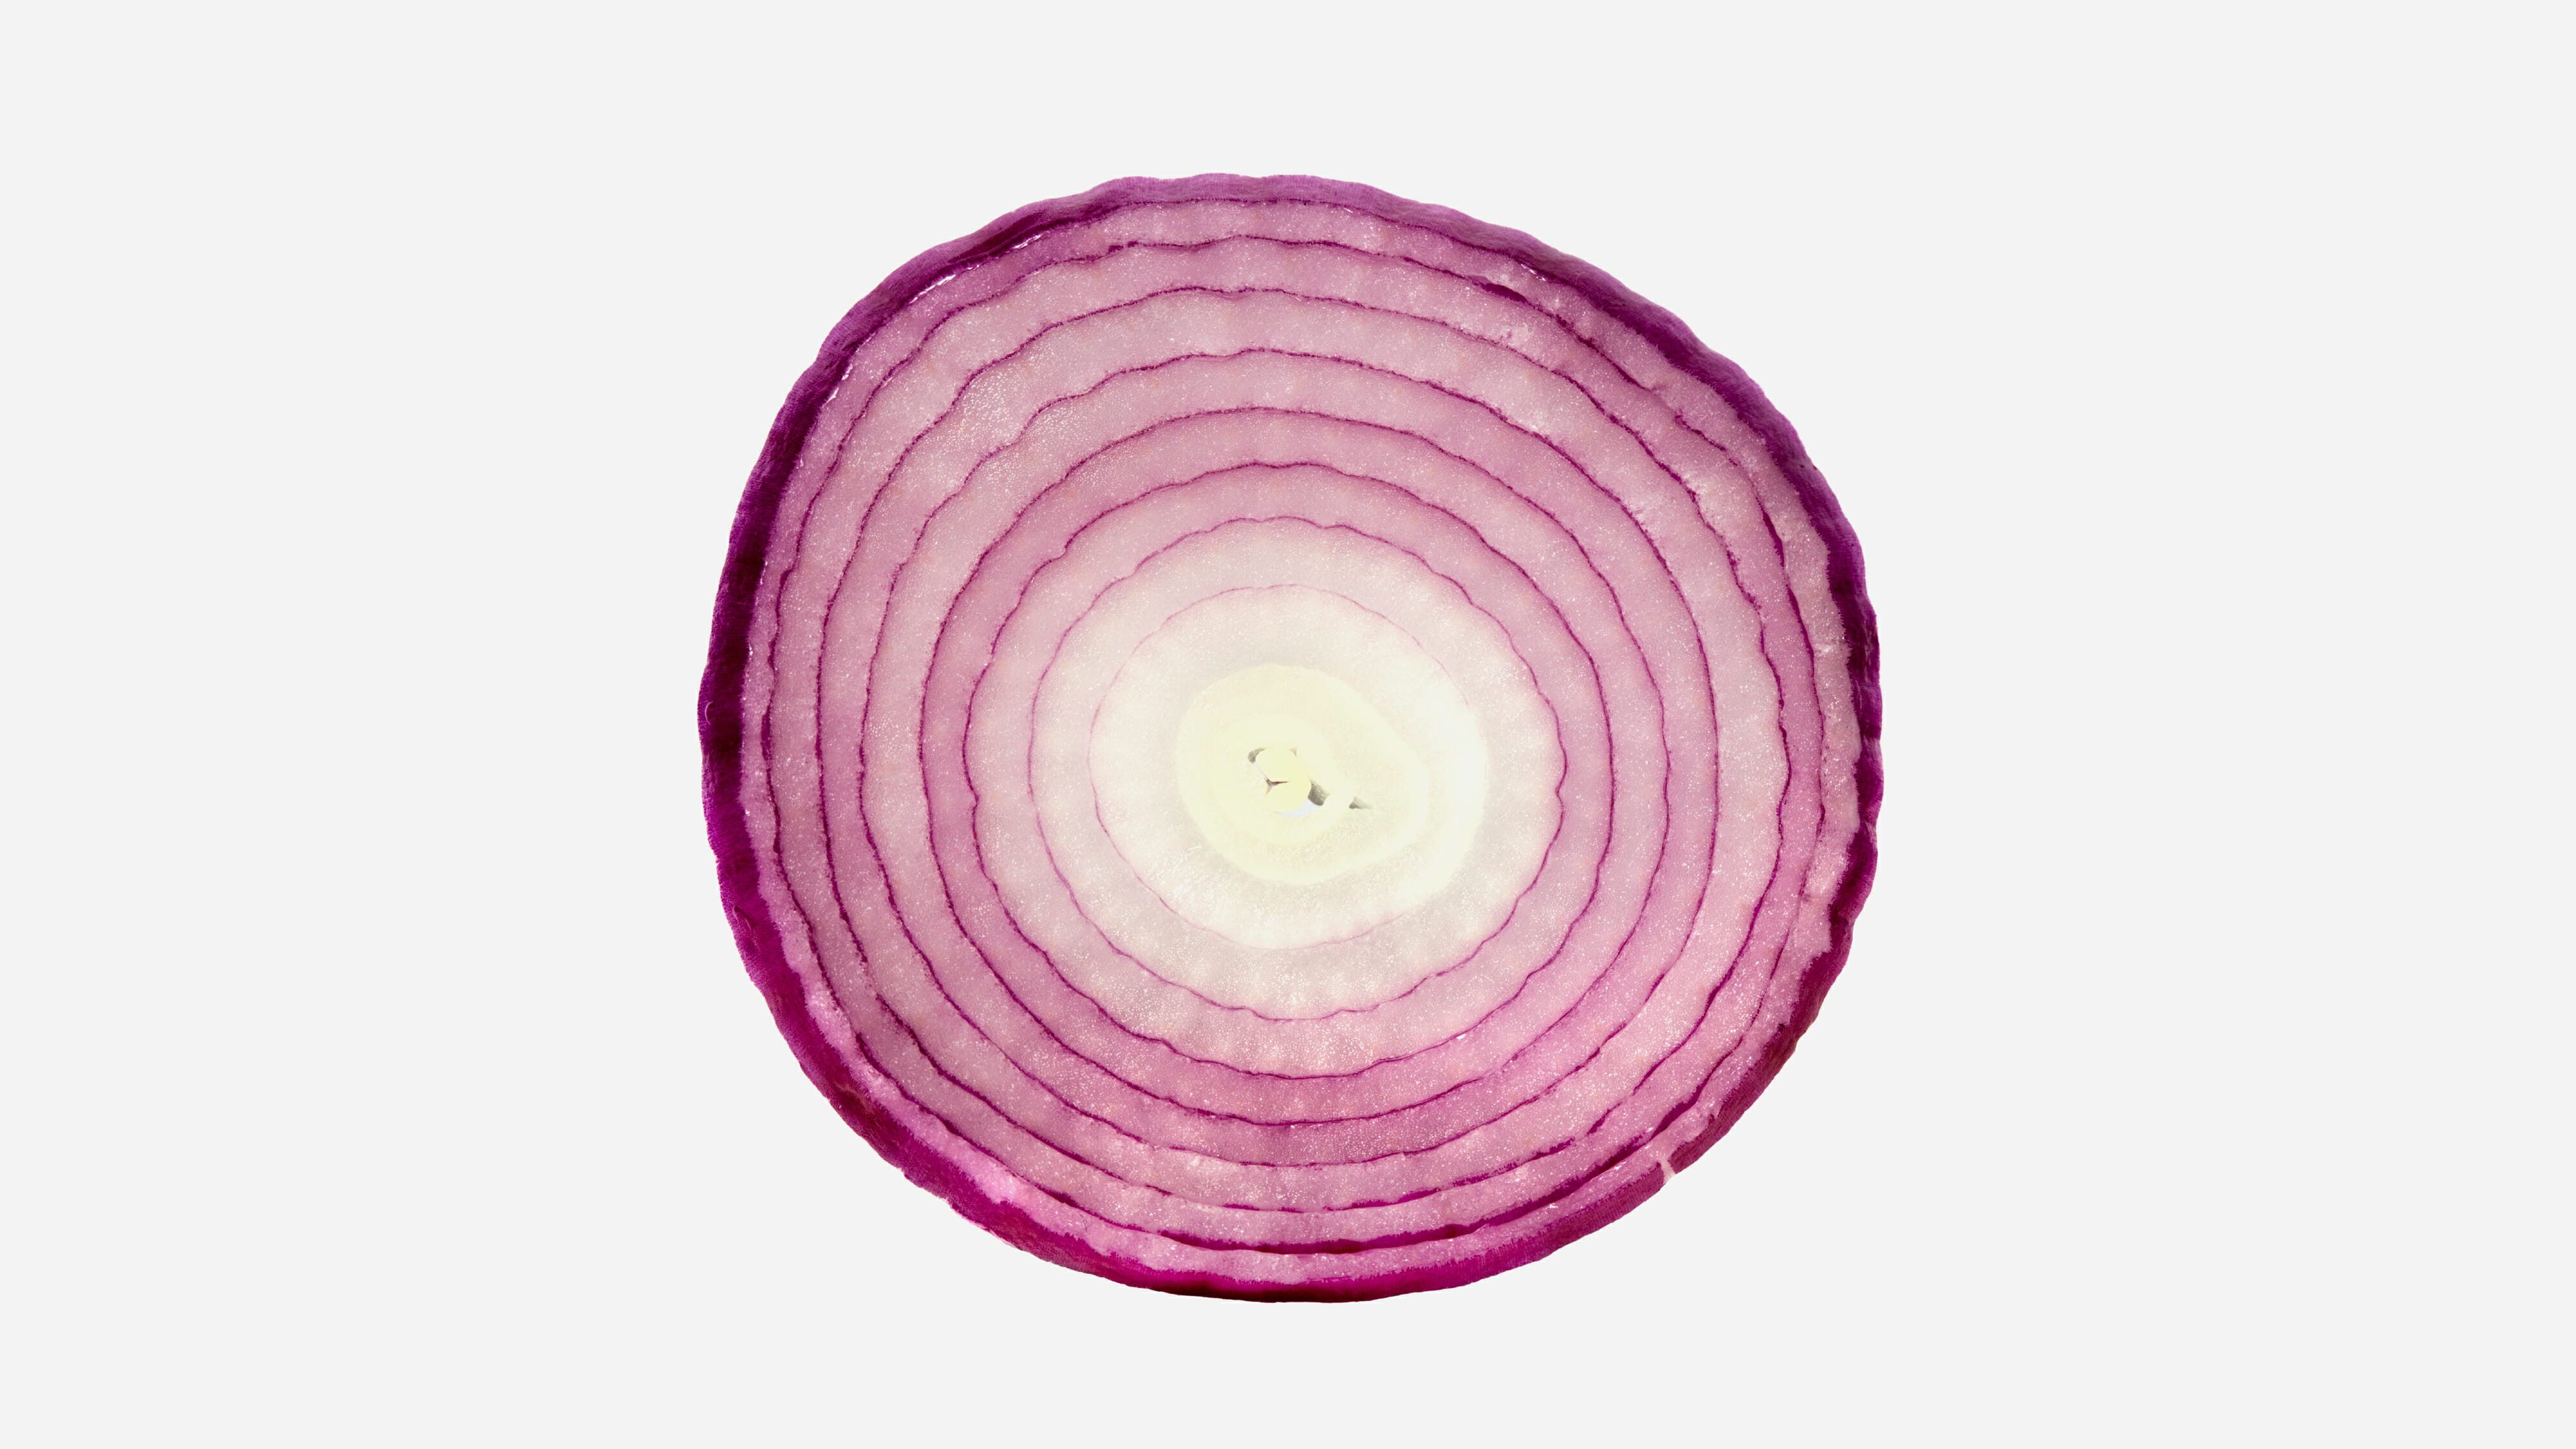 slice of a red onion